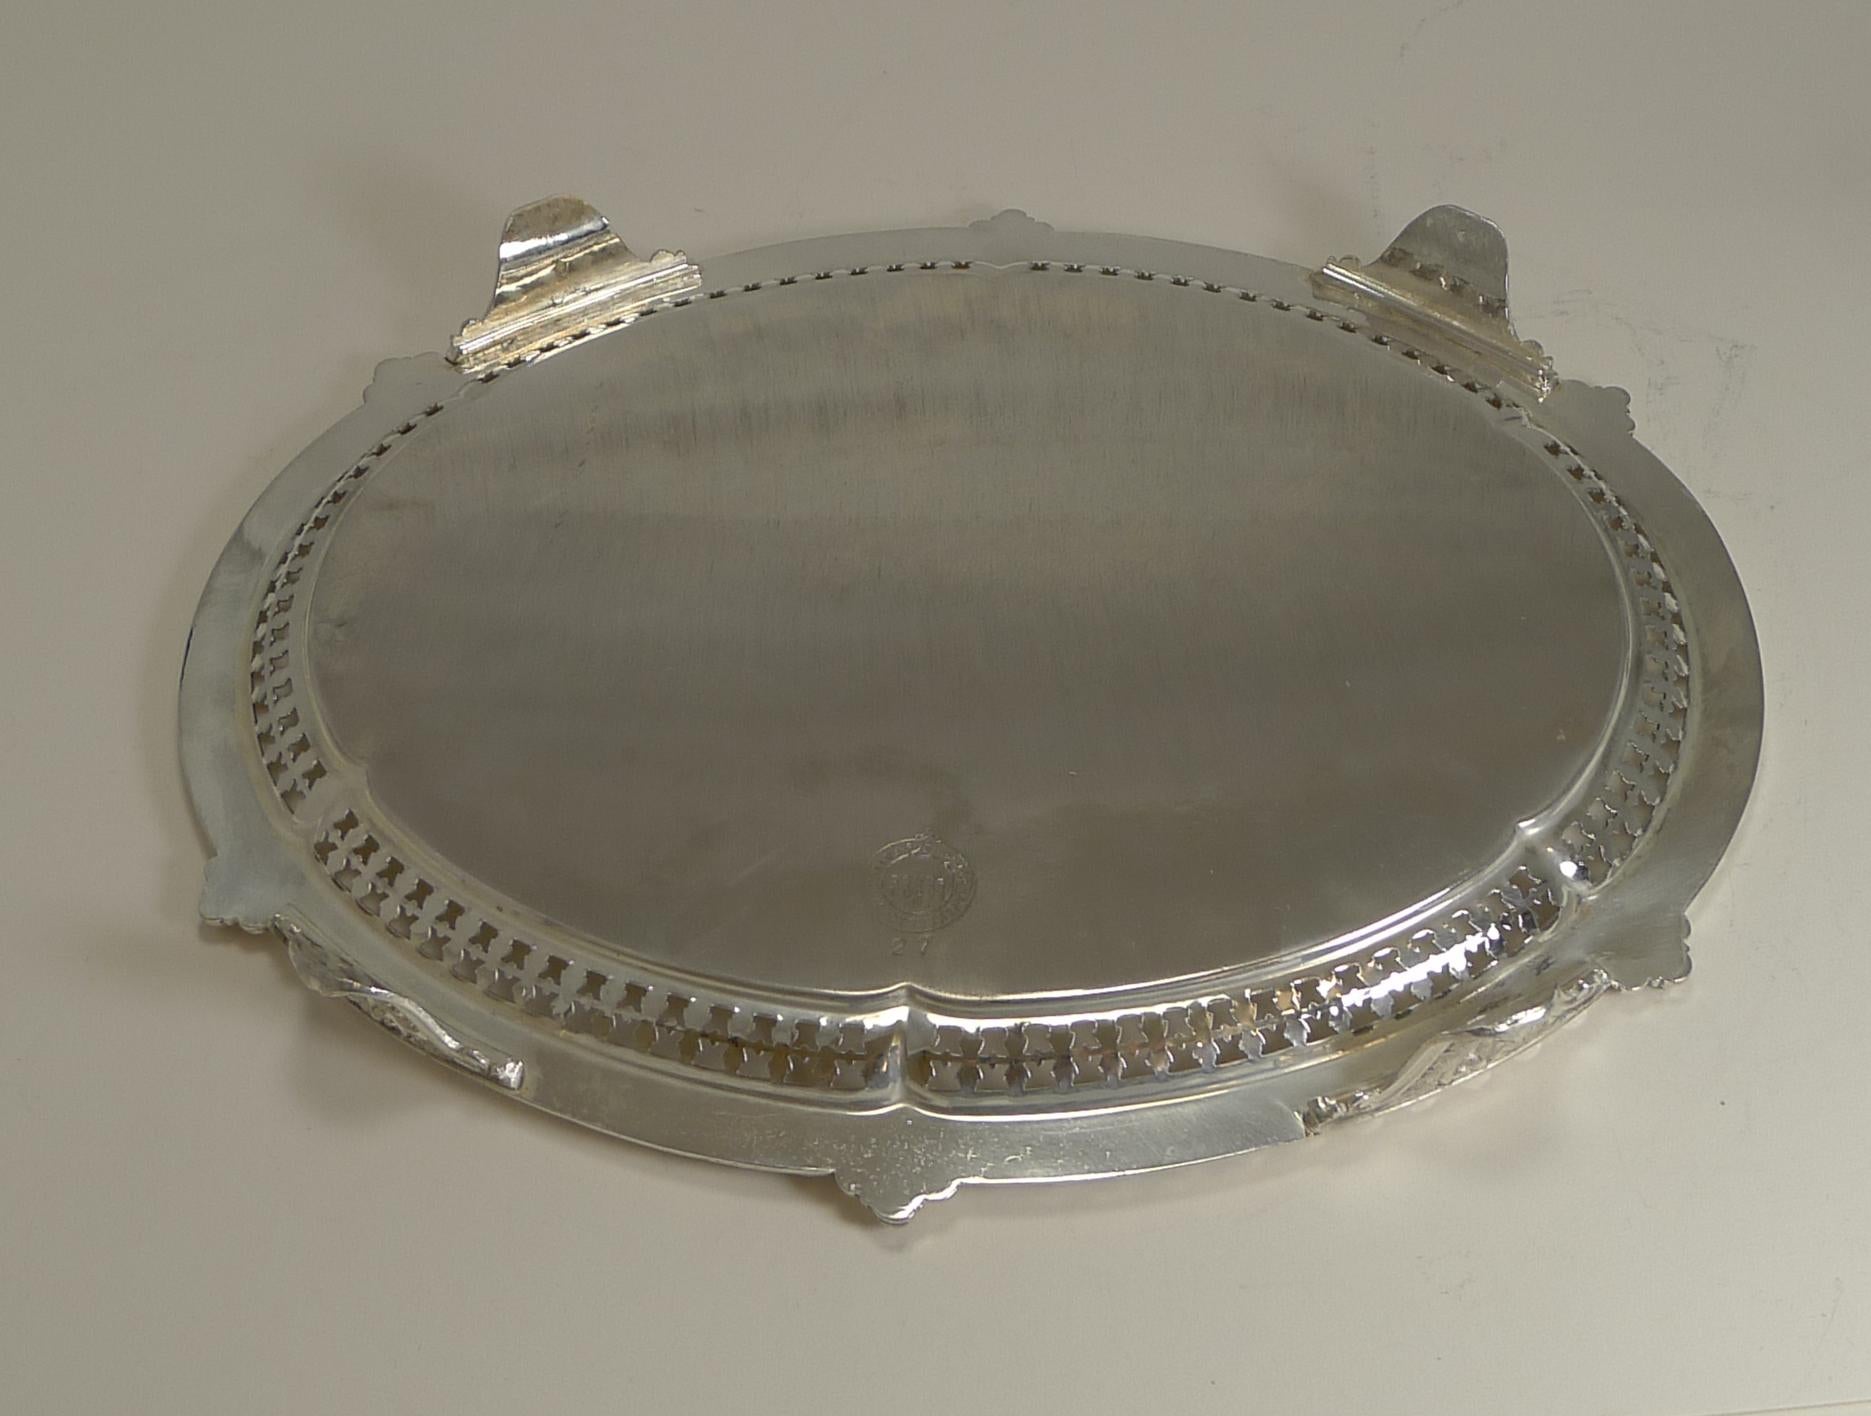 Mid-19th Century Antique English Silver Plated Oval Serving Tray / Salver, circa 1869